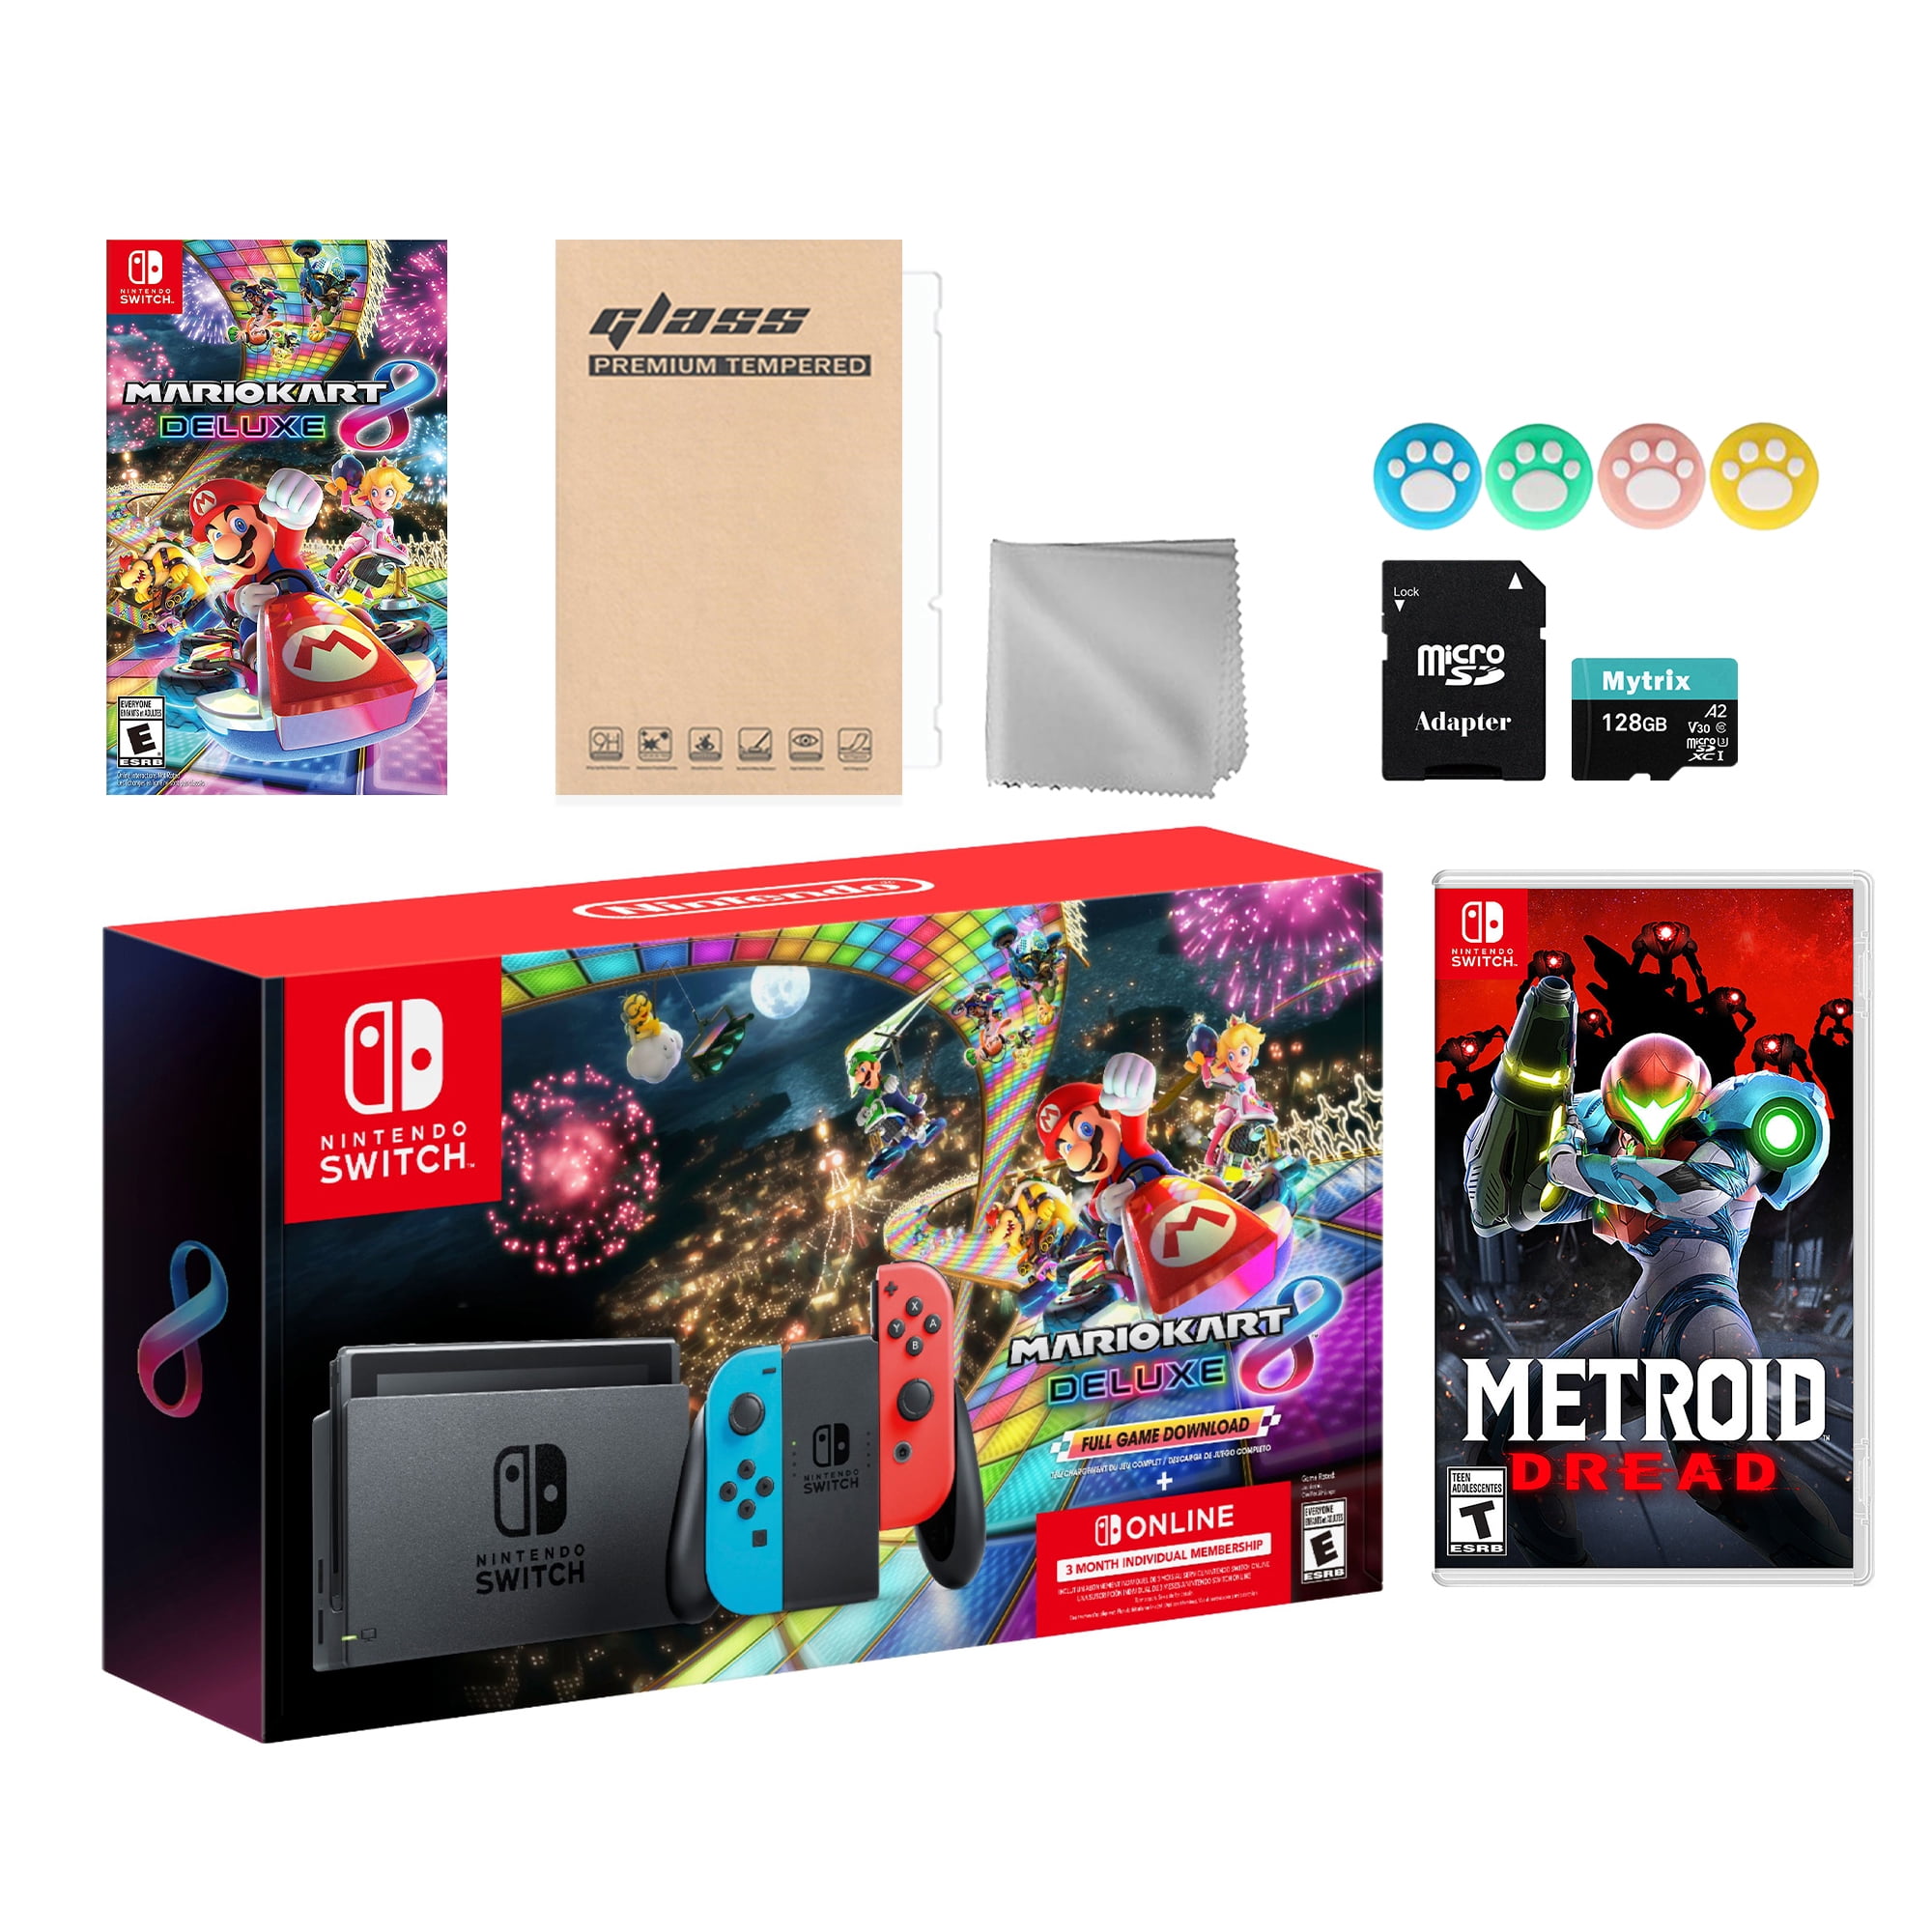 Nintendo Switch OLED Blue Red + Mario Kart 8 Deluxe - Coolblue - Before  23:59, delivered tomorrow